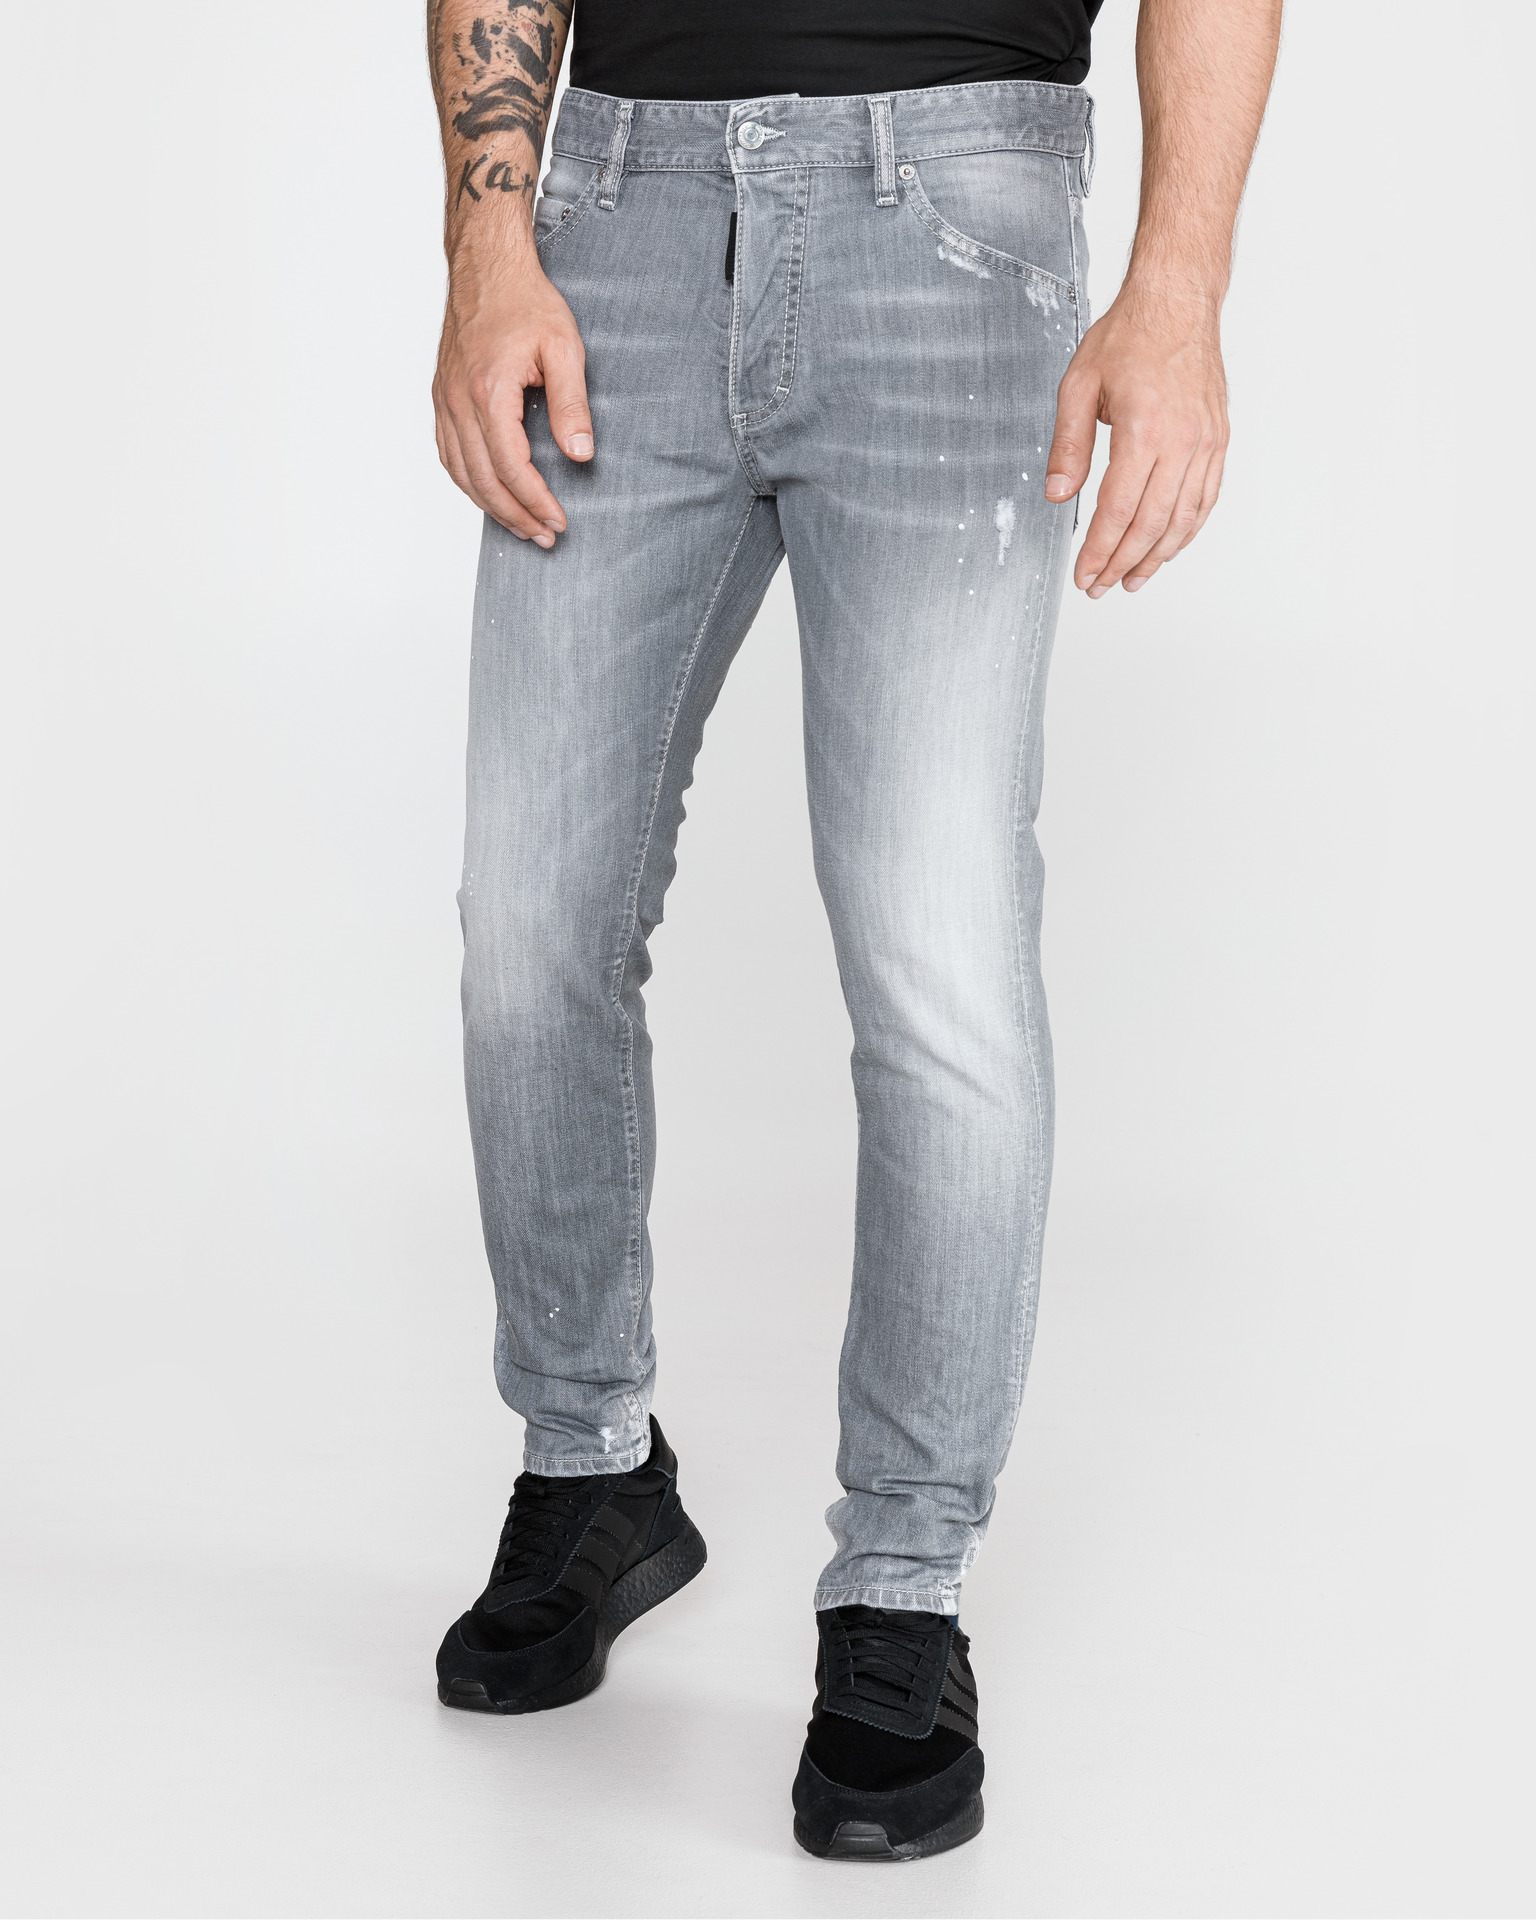 Lelie syndroom liefde DSQUARED2 - Jeans Bibloo.nl